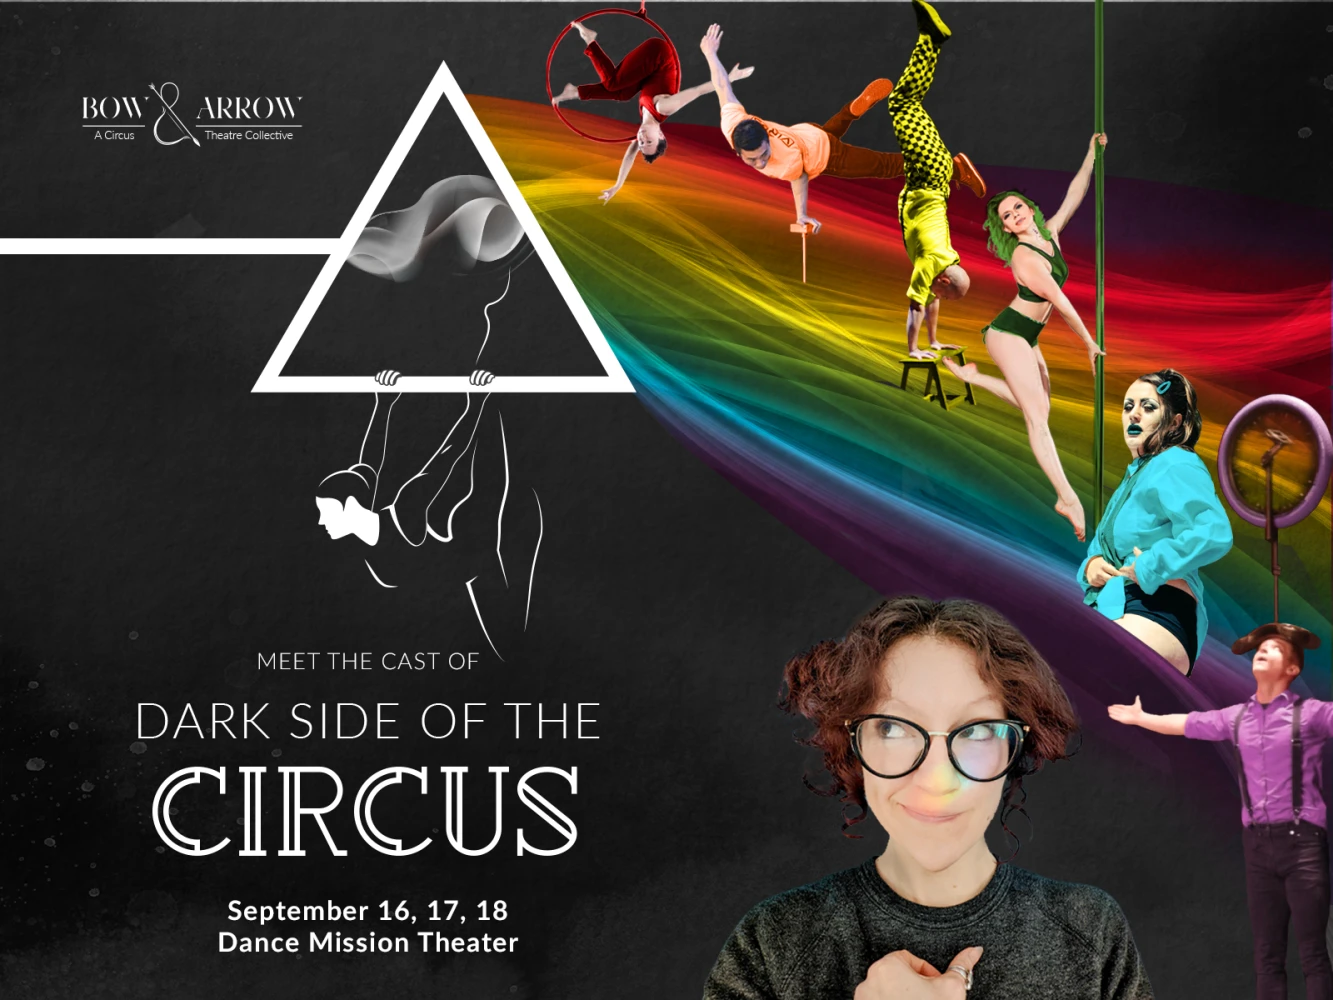 Dark Side of the Circus: What to expect - 1